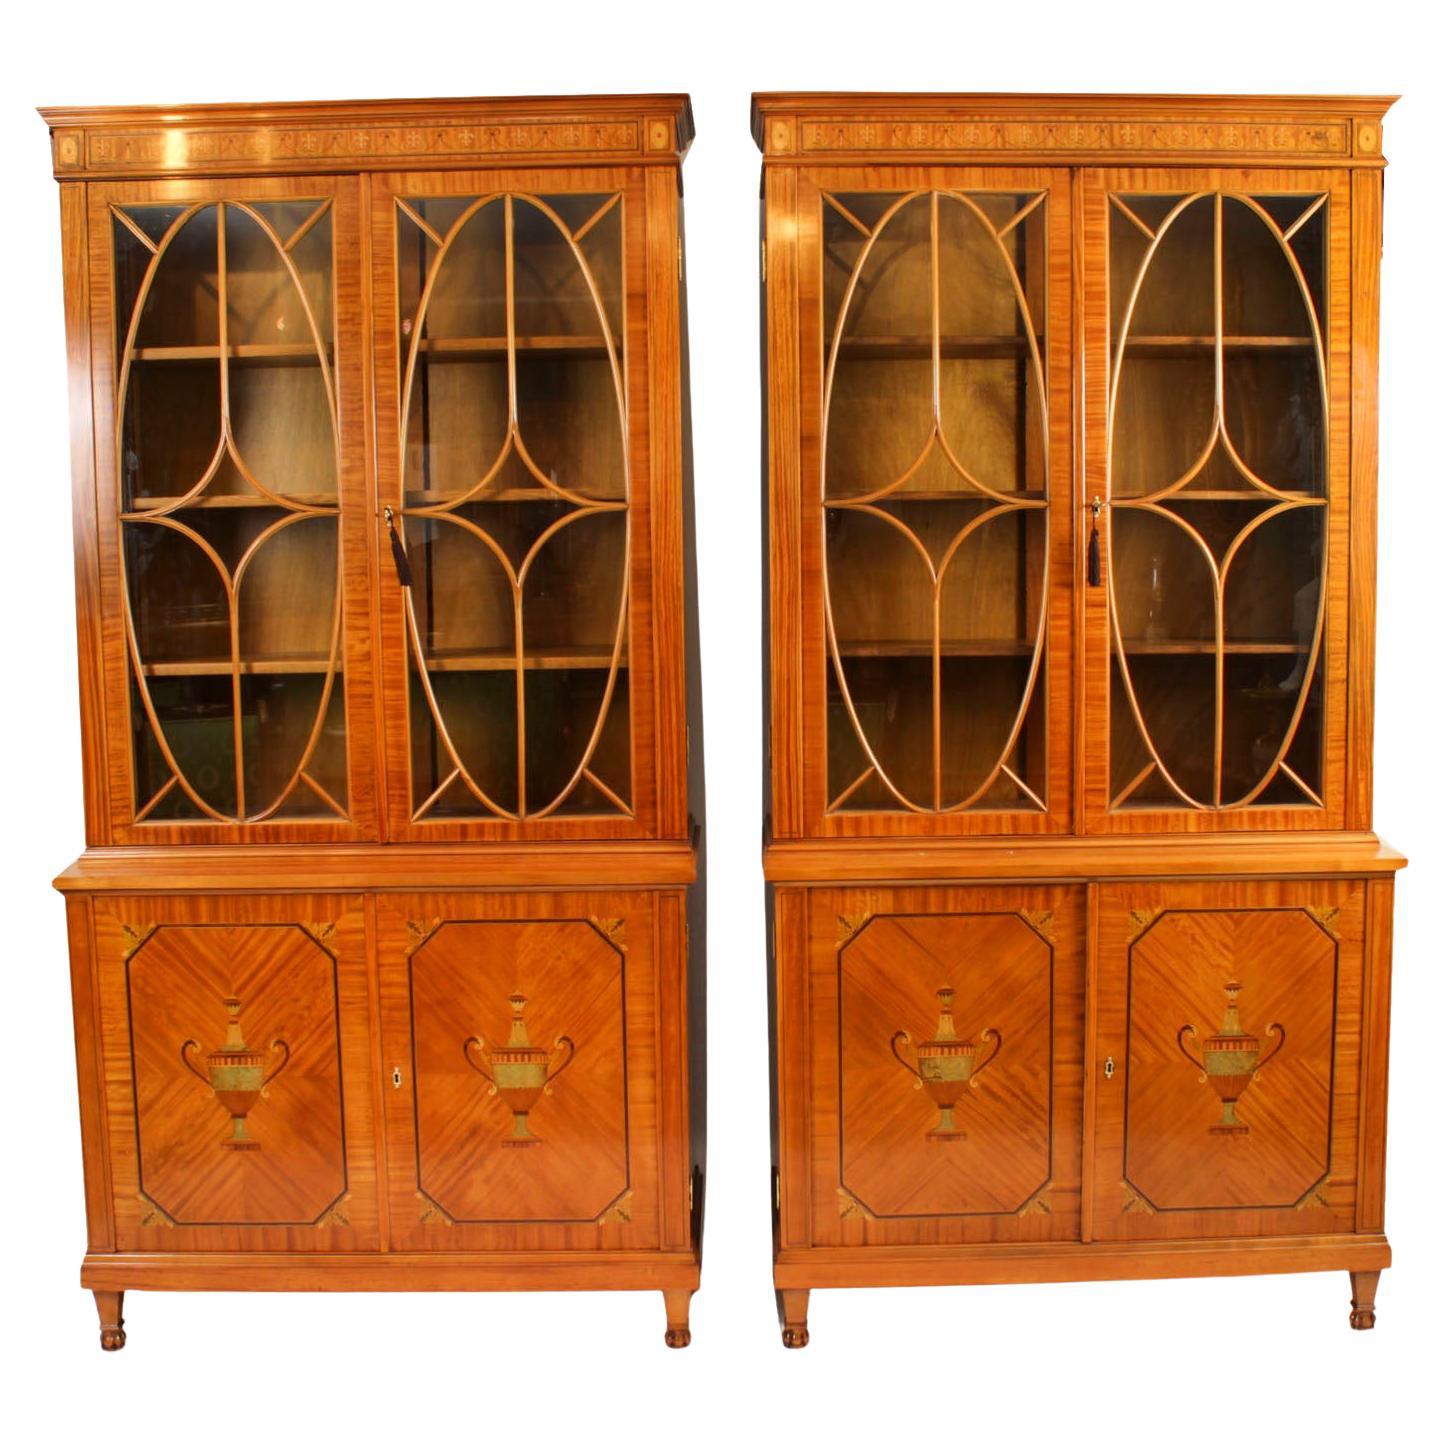 Antique Pair Edwardian Inlaid Satinwood Bookcases by Maple & Co Early 20th C For Sale